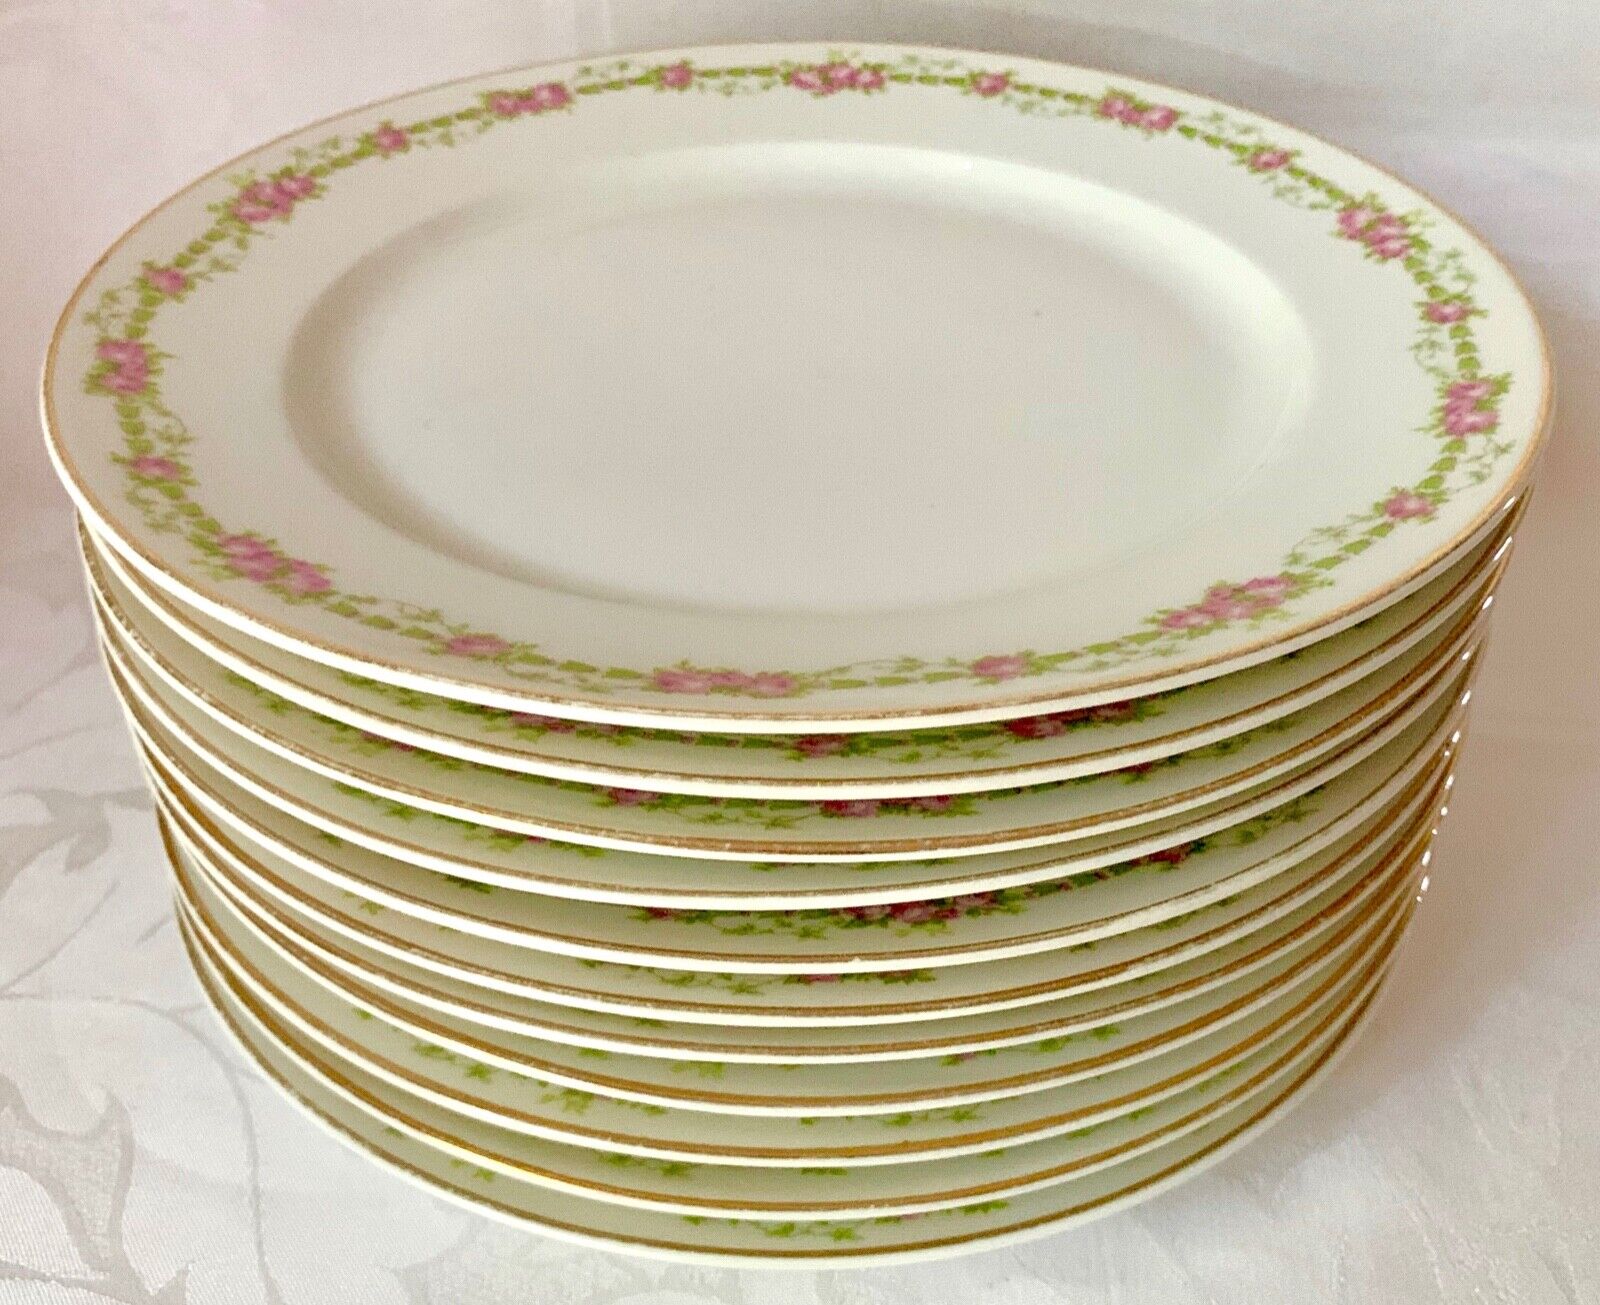 11 GORGEOUS 1907 T&V LIMOGES 9.5in LUNCH PLATES, SWAGS, PINK ROSES, GREEN LEAVES